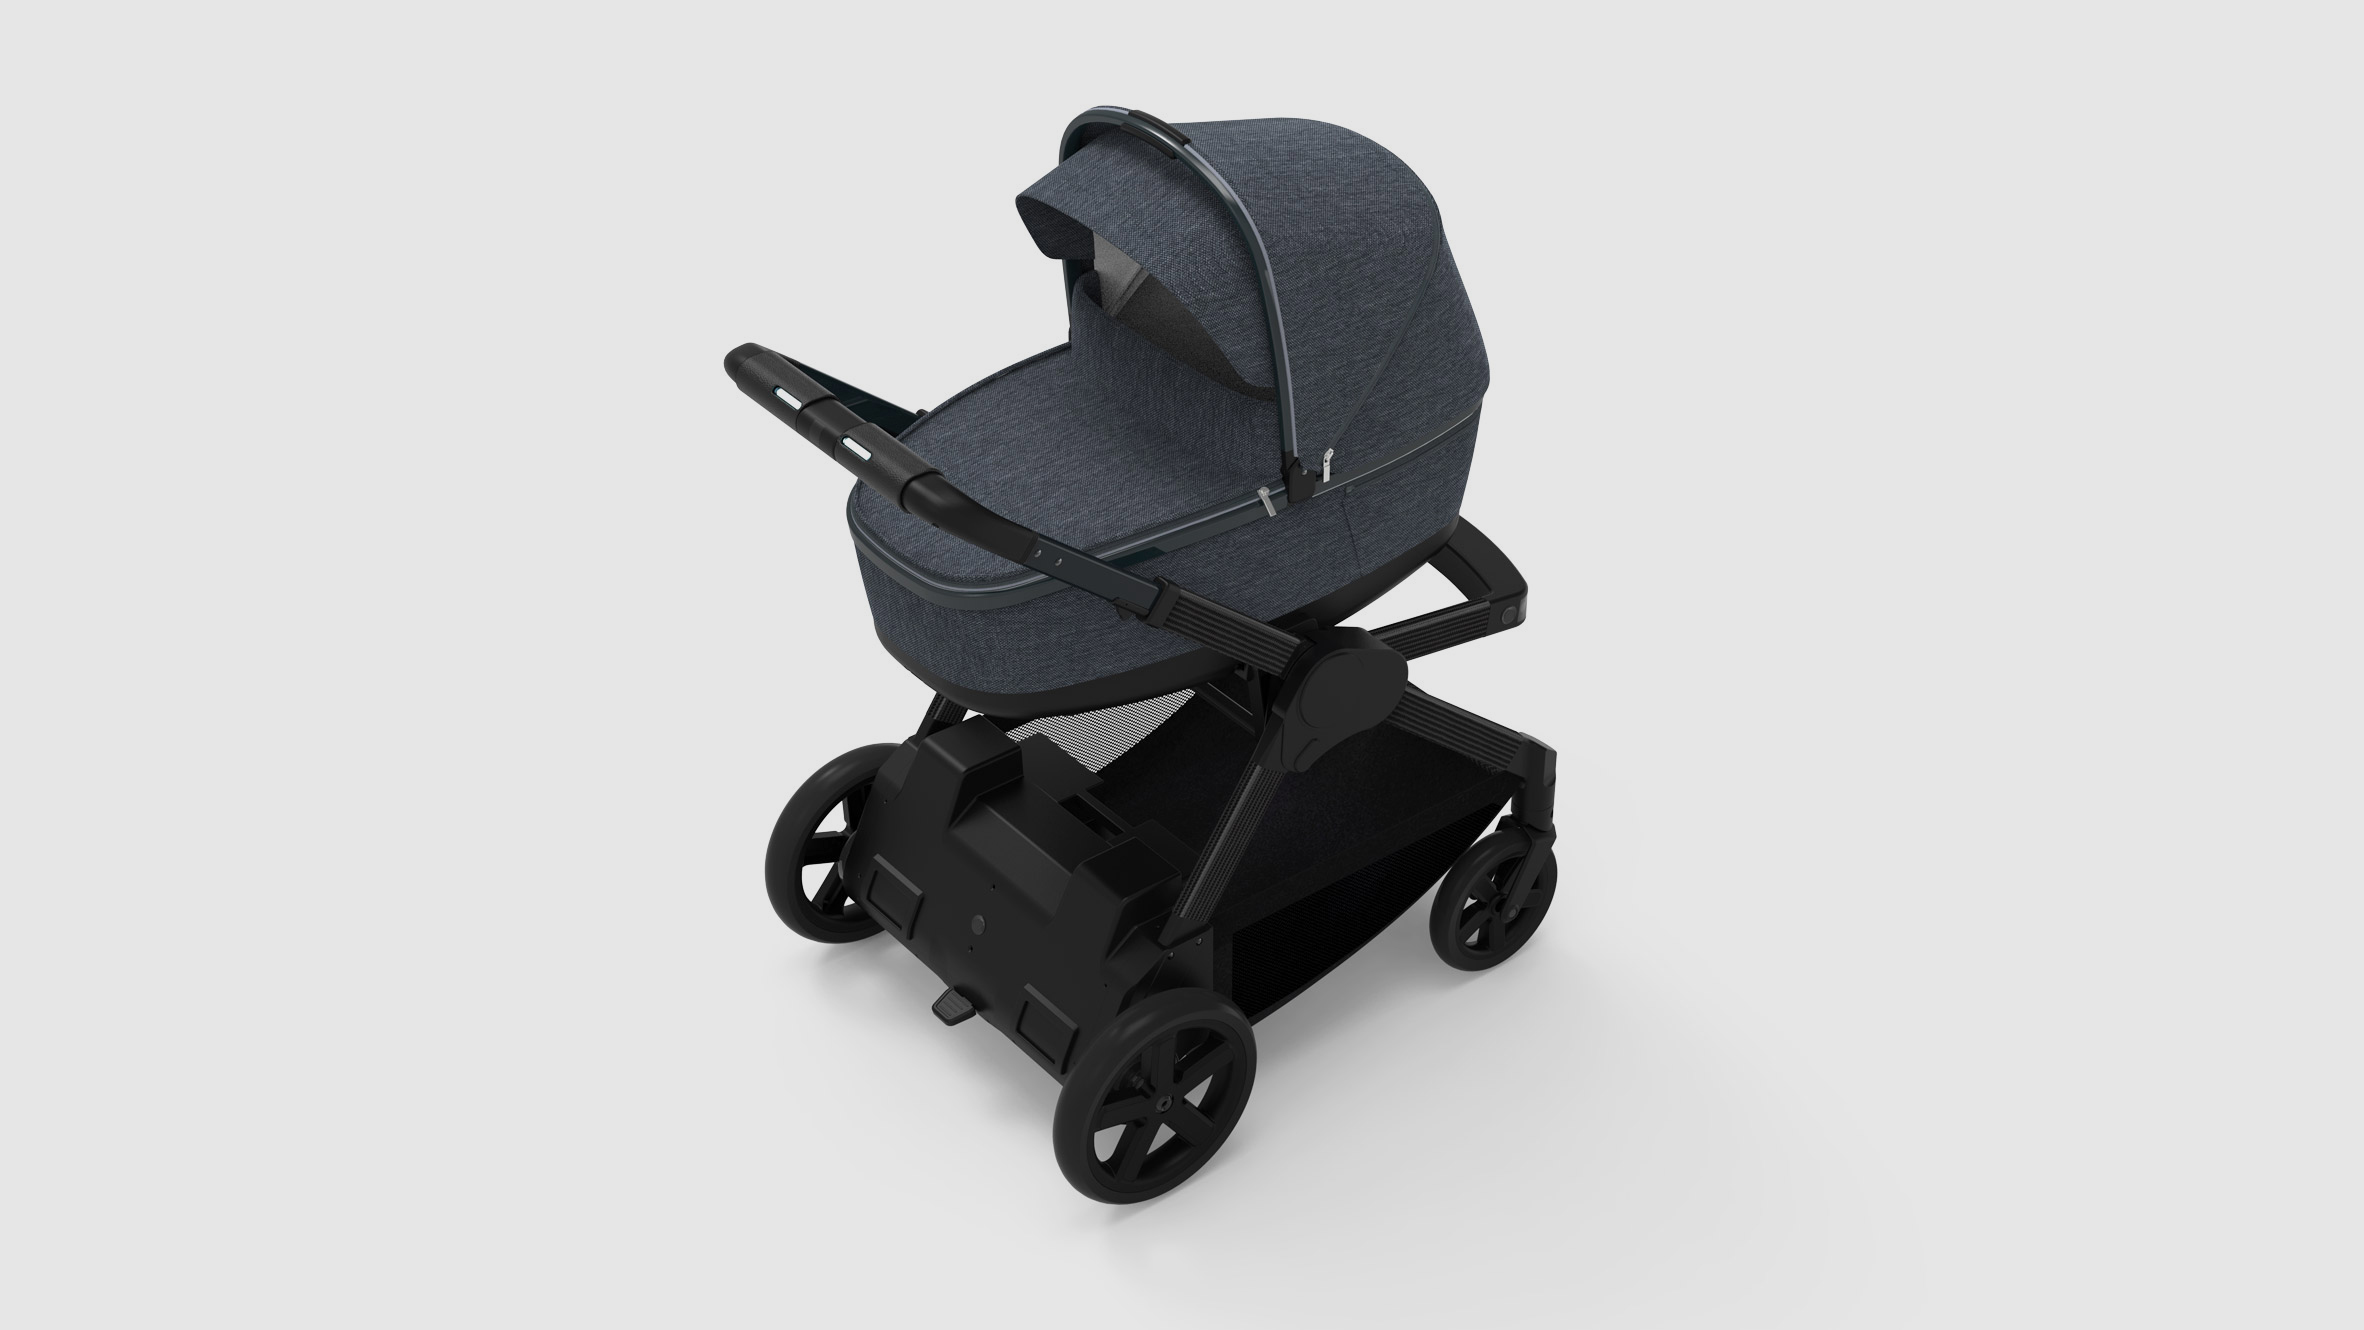 Experience effortless parenting with the #CybexCoya ✨ Its intuitive de, Strollers